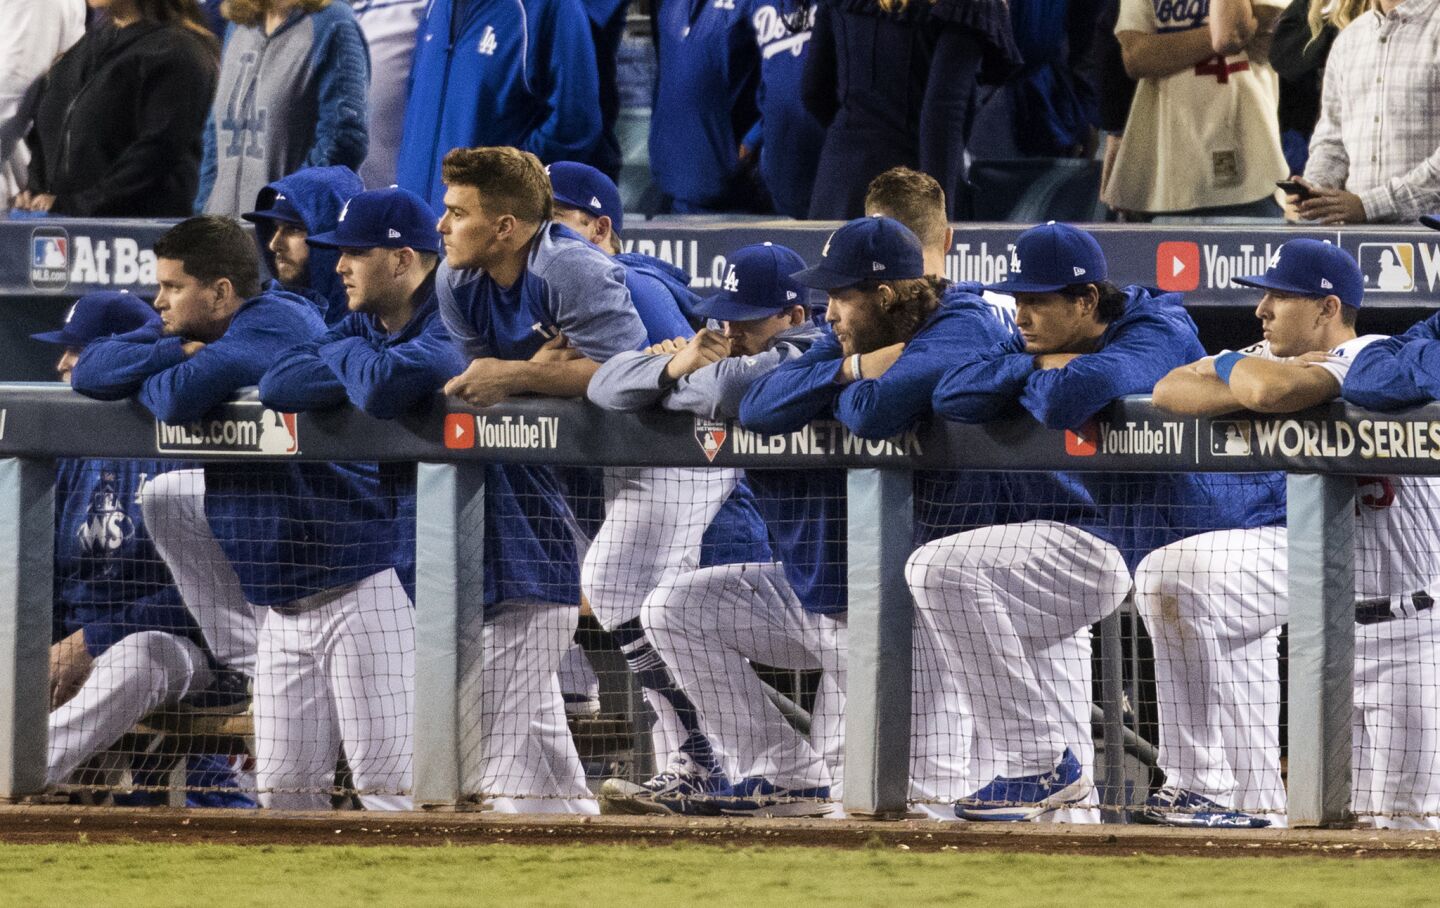 Dodgers watch their World Series dreams disappear with a 5-1 loss to the Houston Astros in the ninth inning.